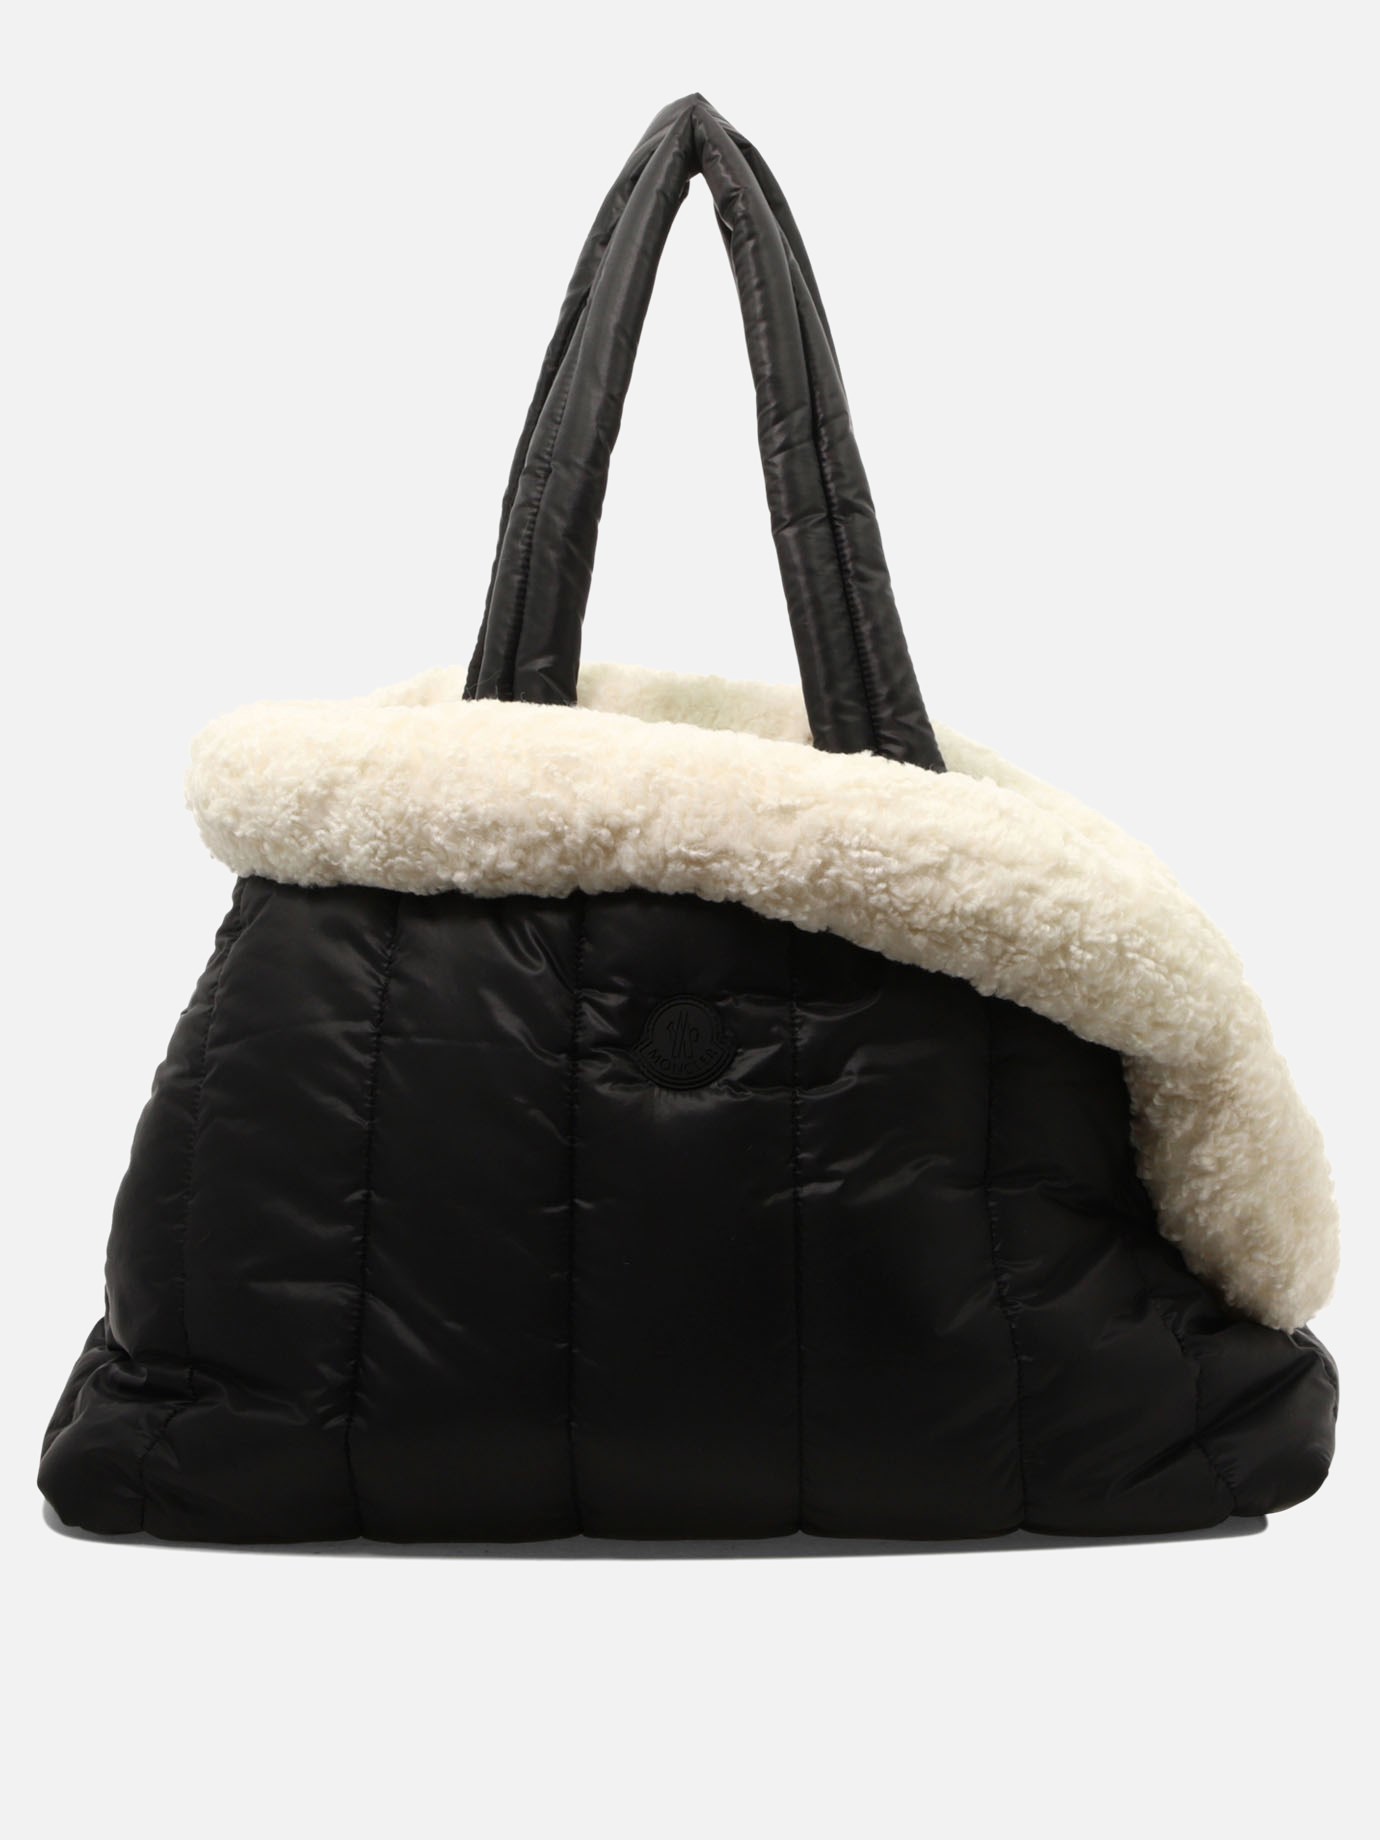 Bag with removable interiorby Moncler Poldo - 4